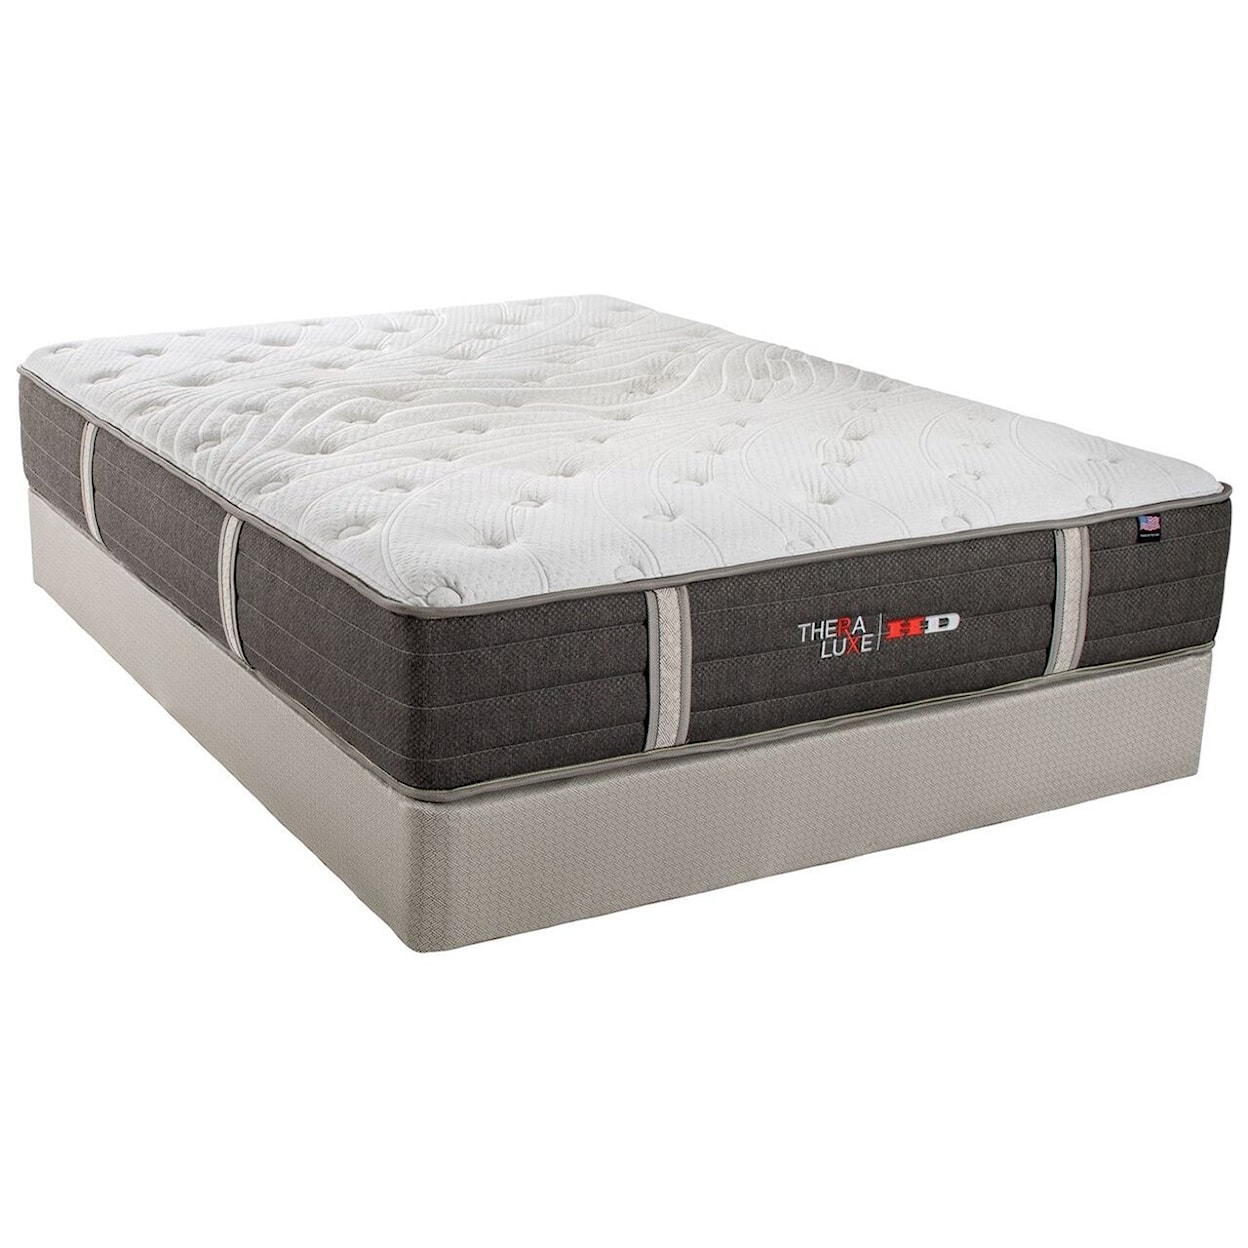 Therapedic Thera Luxe HD Balsam Full Firm Pocketed Coil Mattress Set